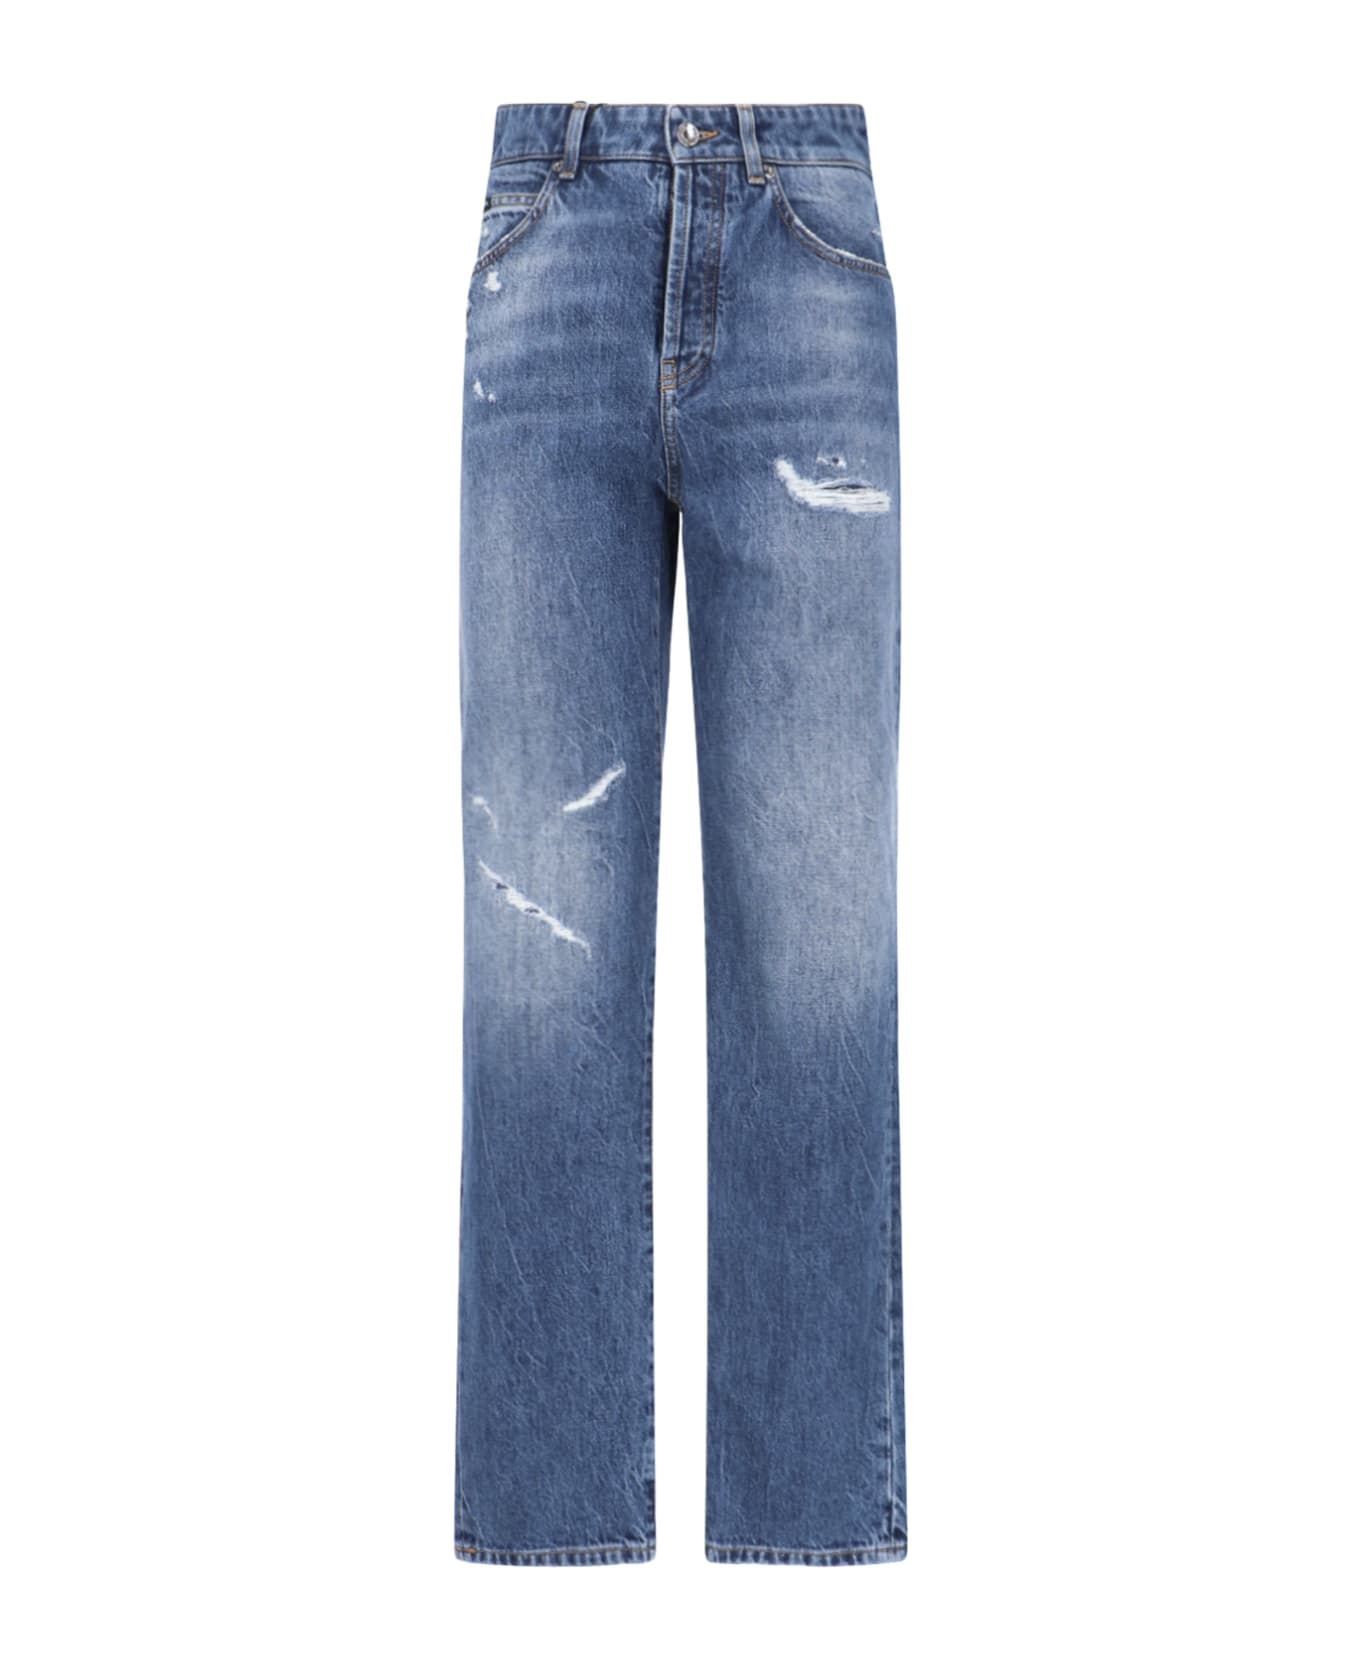 Dolce & Gabbana Ripped Jeans - Blue